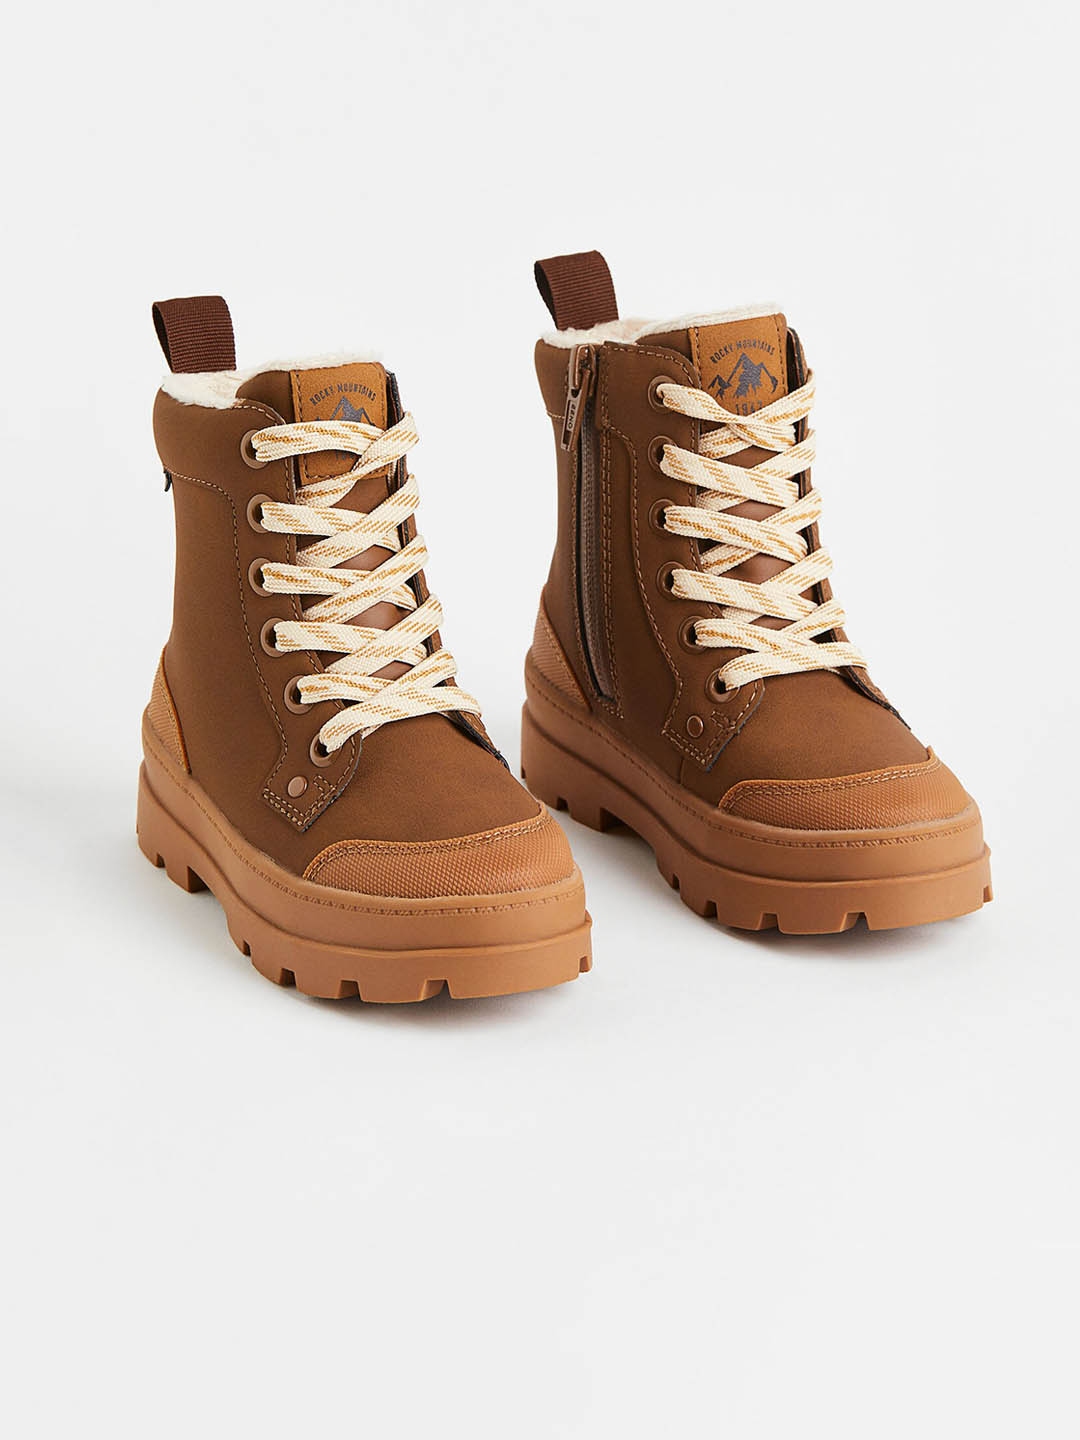 Buy H&M Girls Waterproof Boots - Boots for Girls 25452342 | Myntra